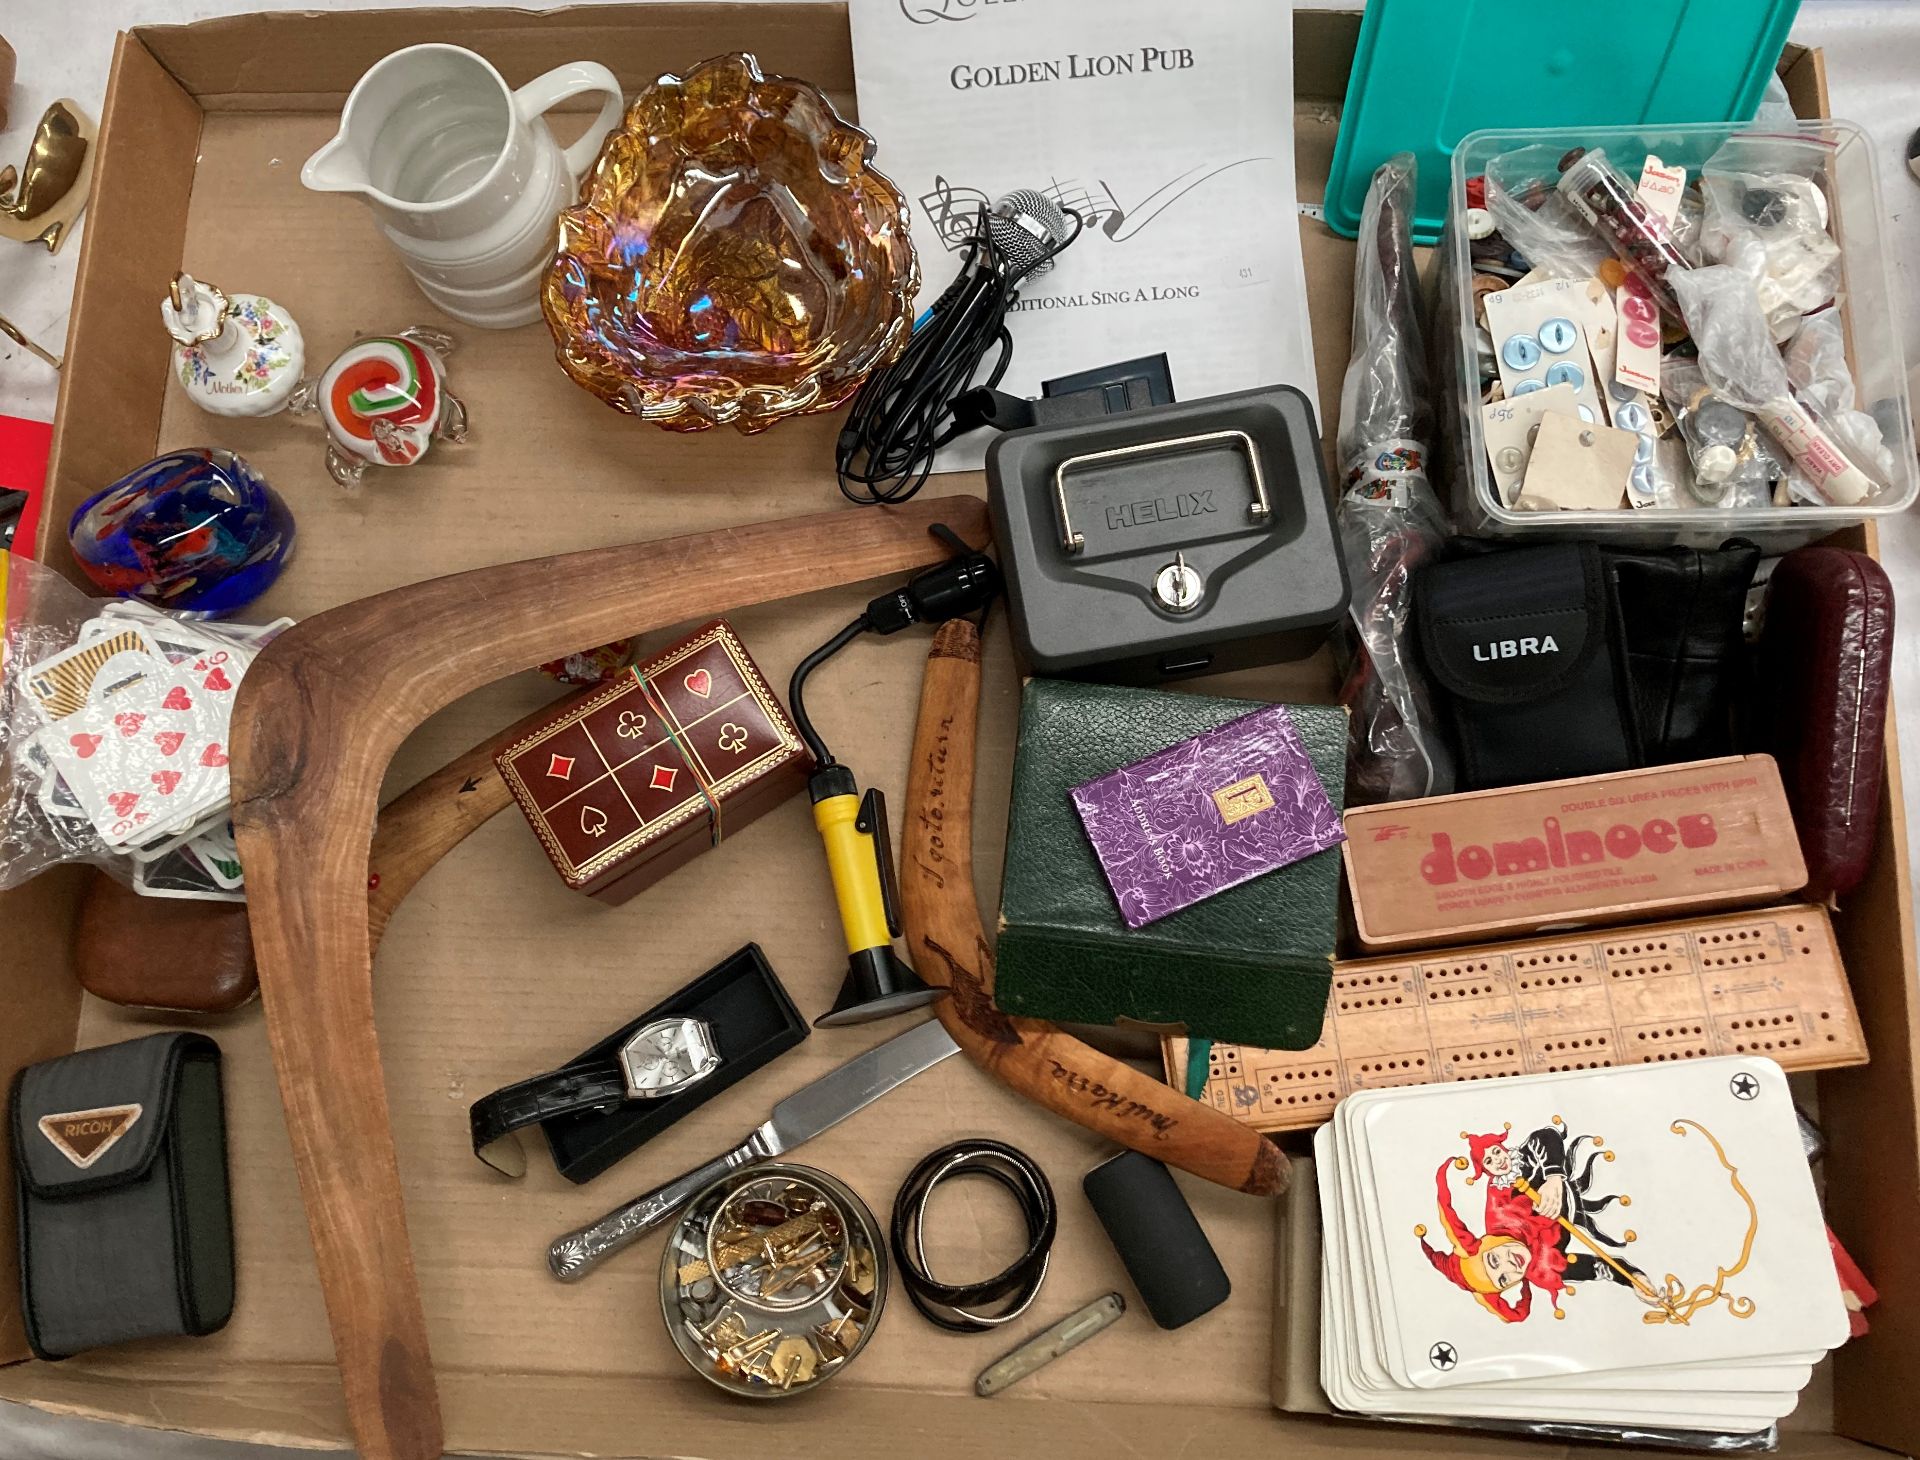 Contents to tray - boomerangs, Helix cash box, sewing accessories, games and cards,